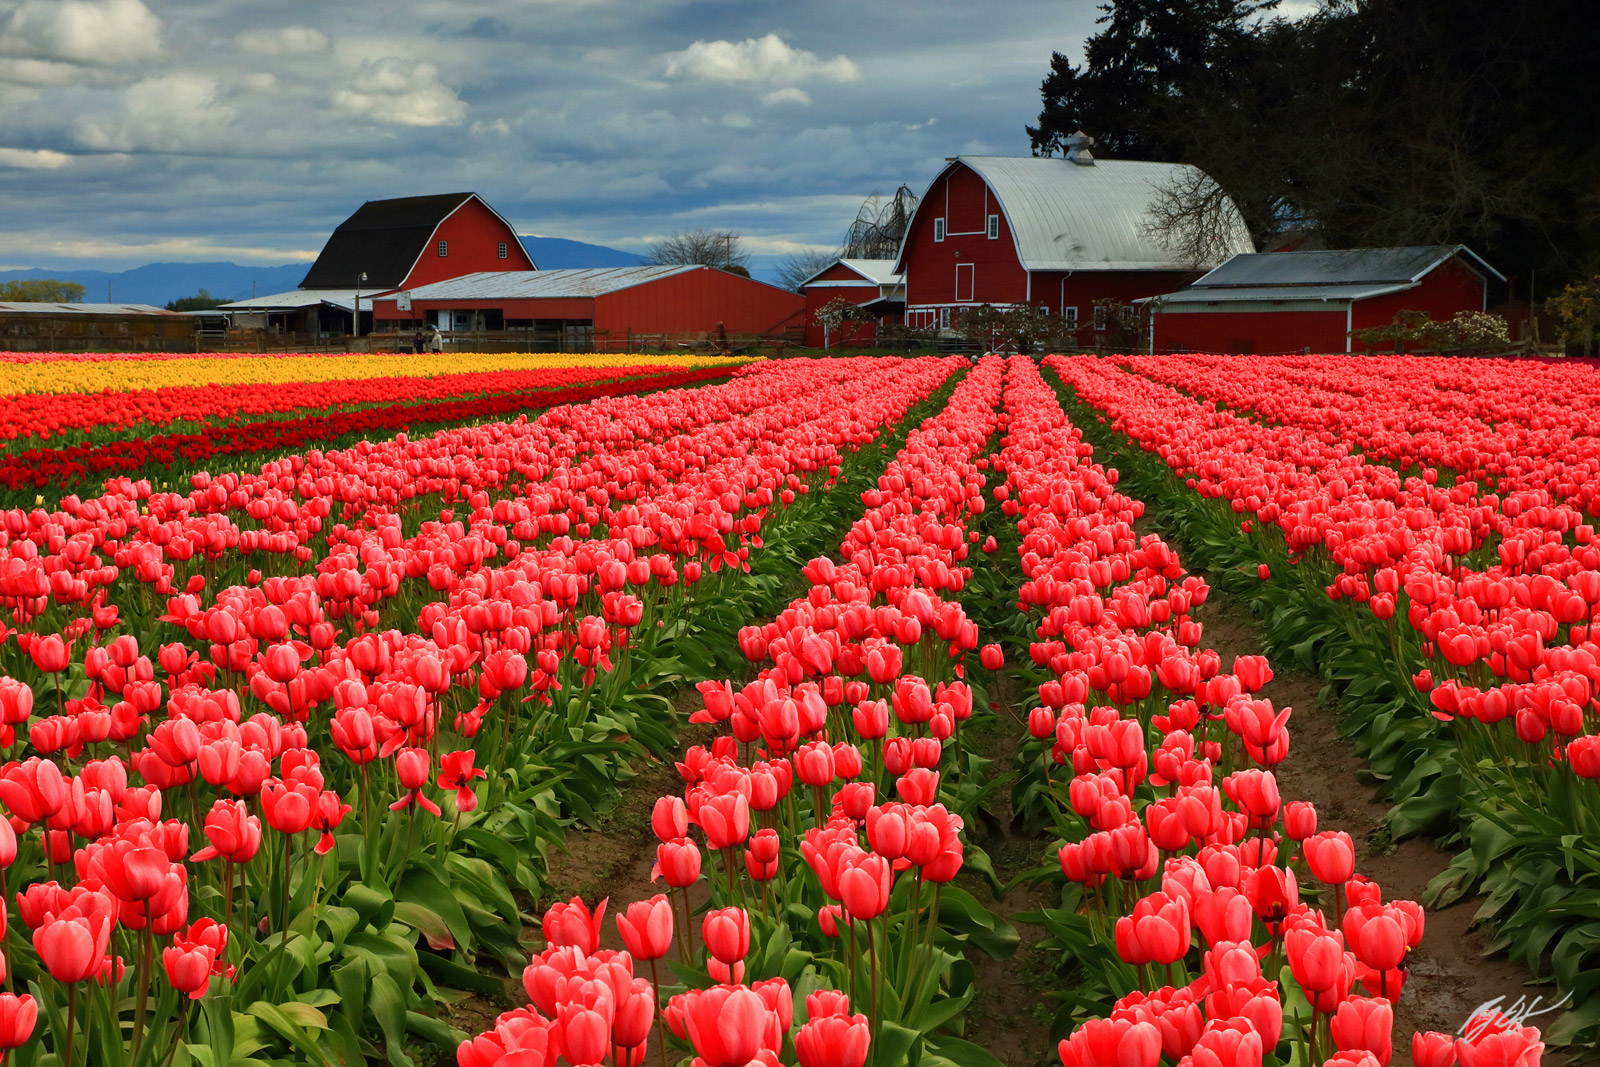 Tulips and Red Barn from Tulip Town in Skagit Valley in Washington